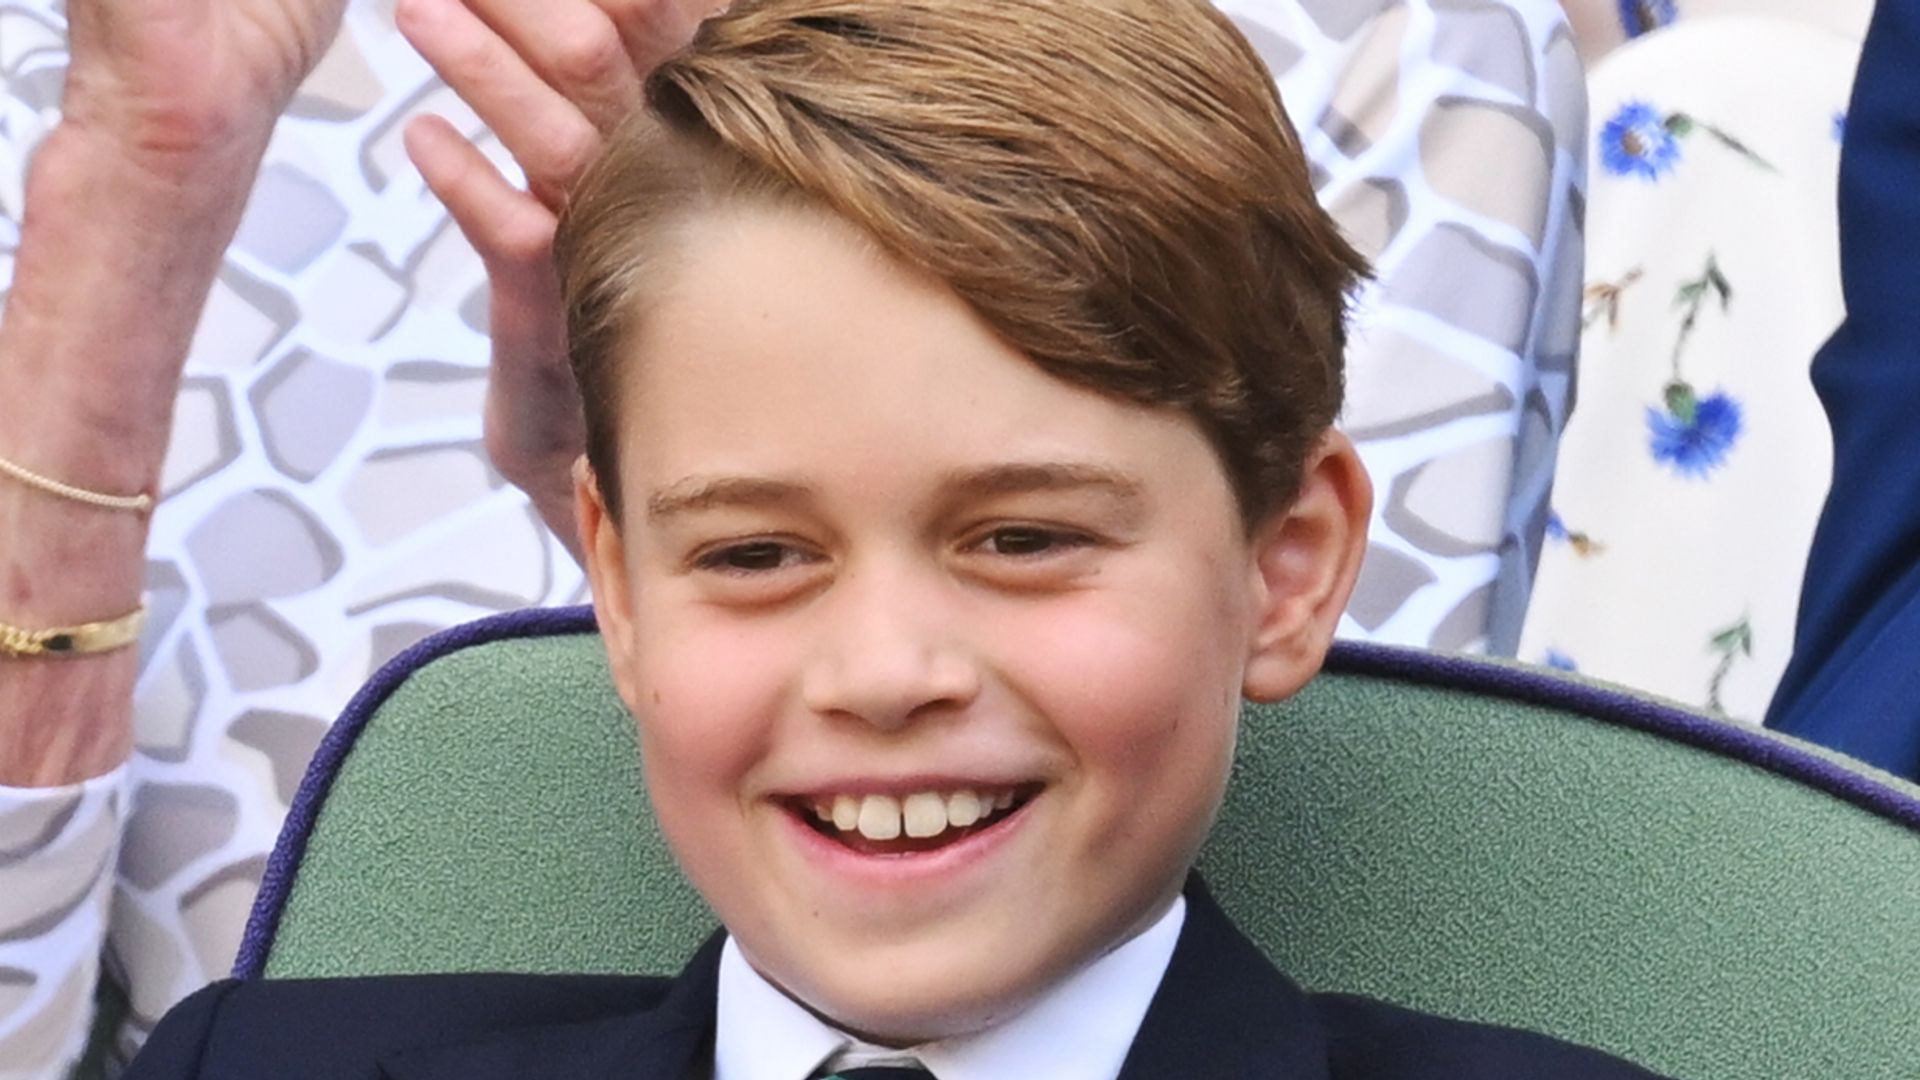 Prince George's sartorial 'breach of protocol' during state visit